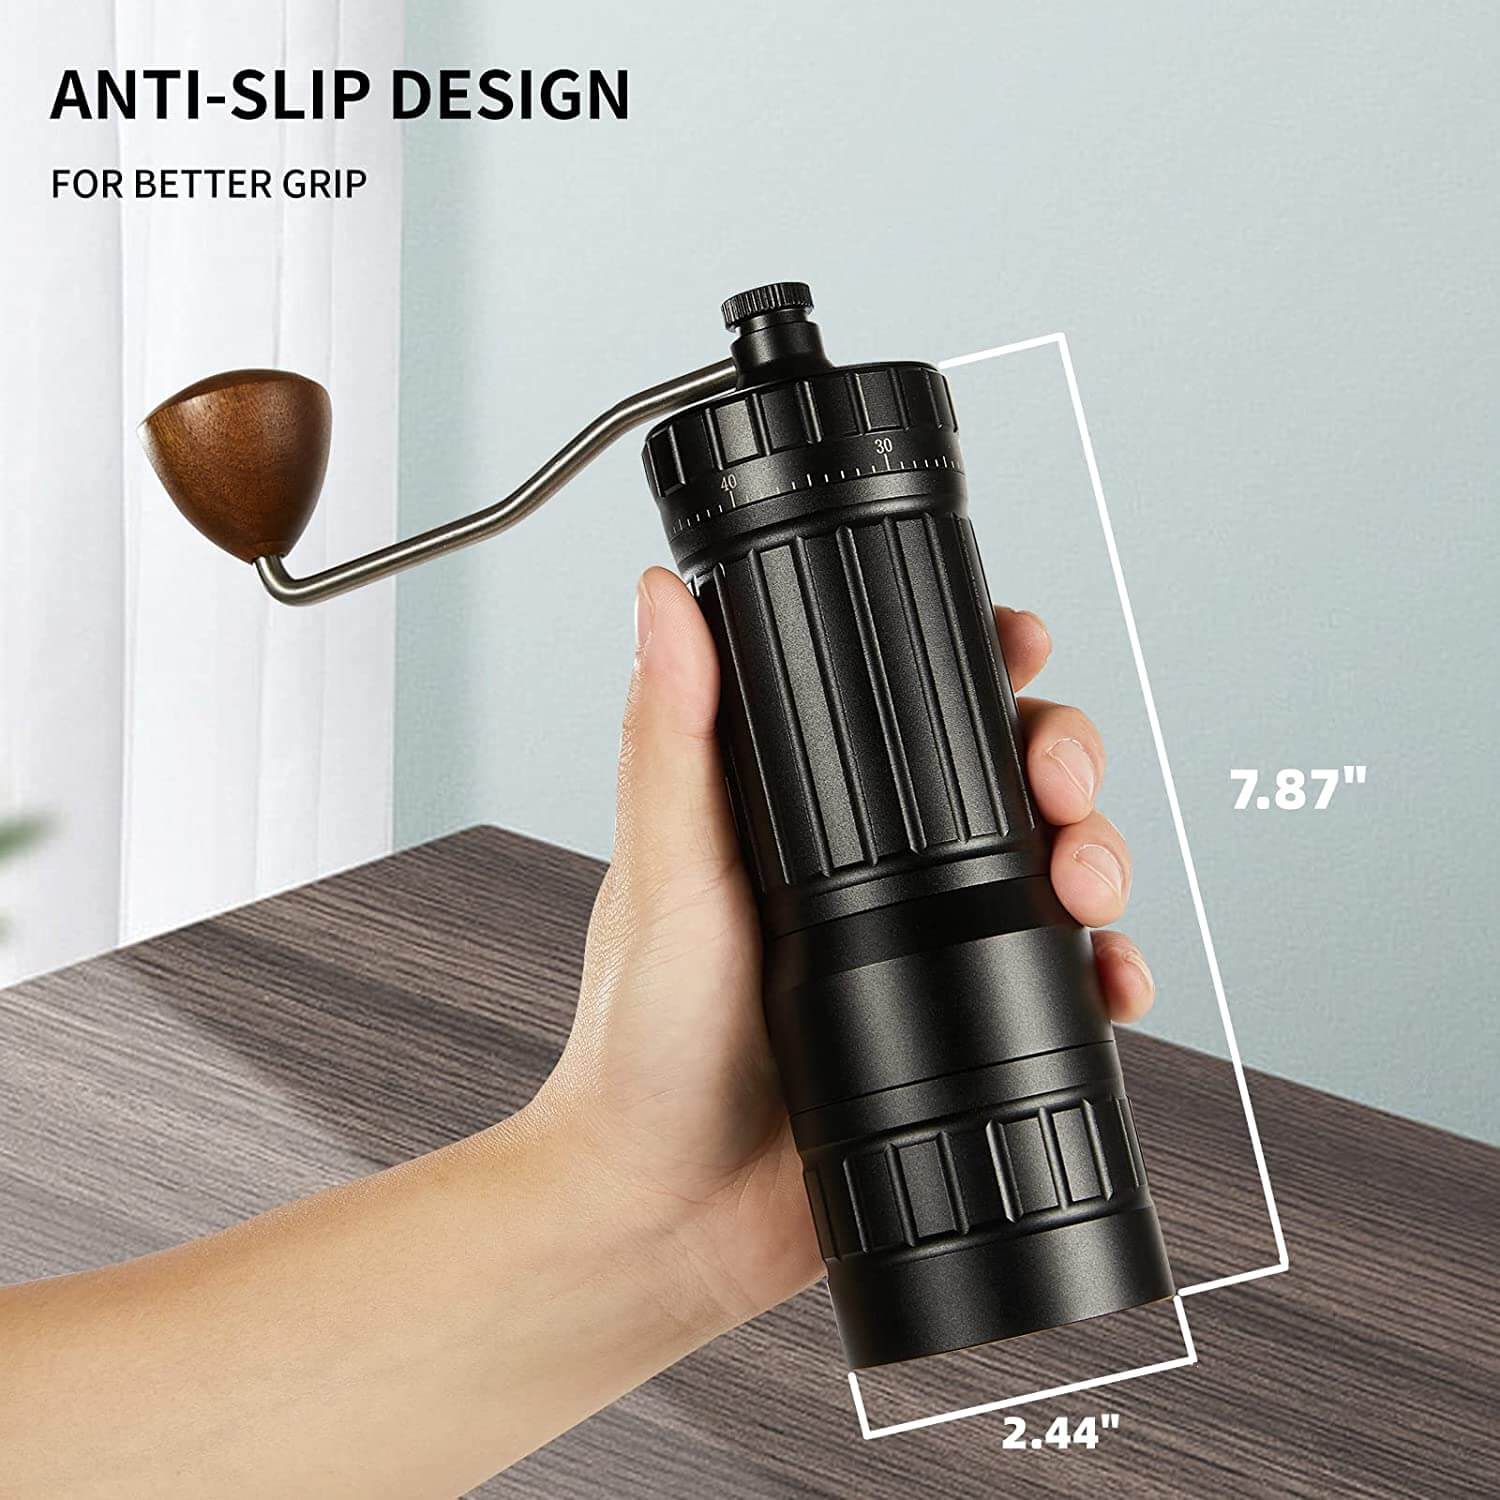 CONQUECO CGM 01 Portable Electric Burr Coffee Grinder: Conqueco Small Coffee  Bean Grinding Machine - Rechargeable Stainless Conical Burr Grinder